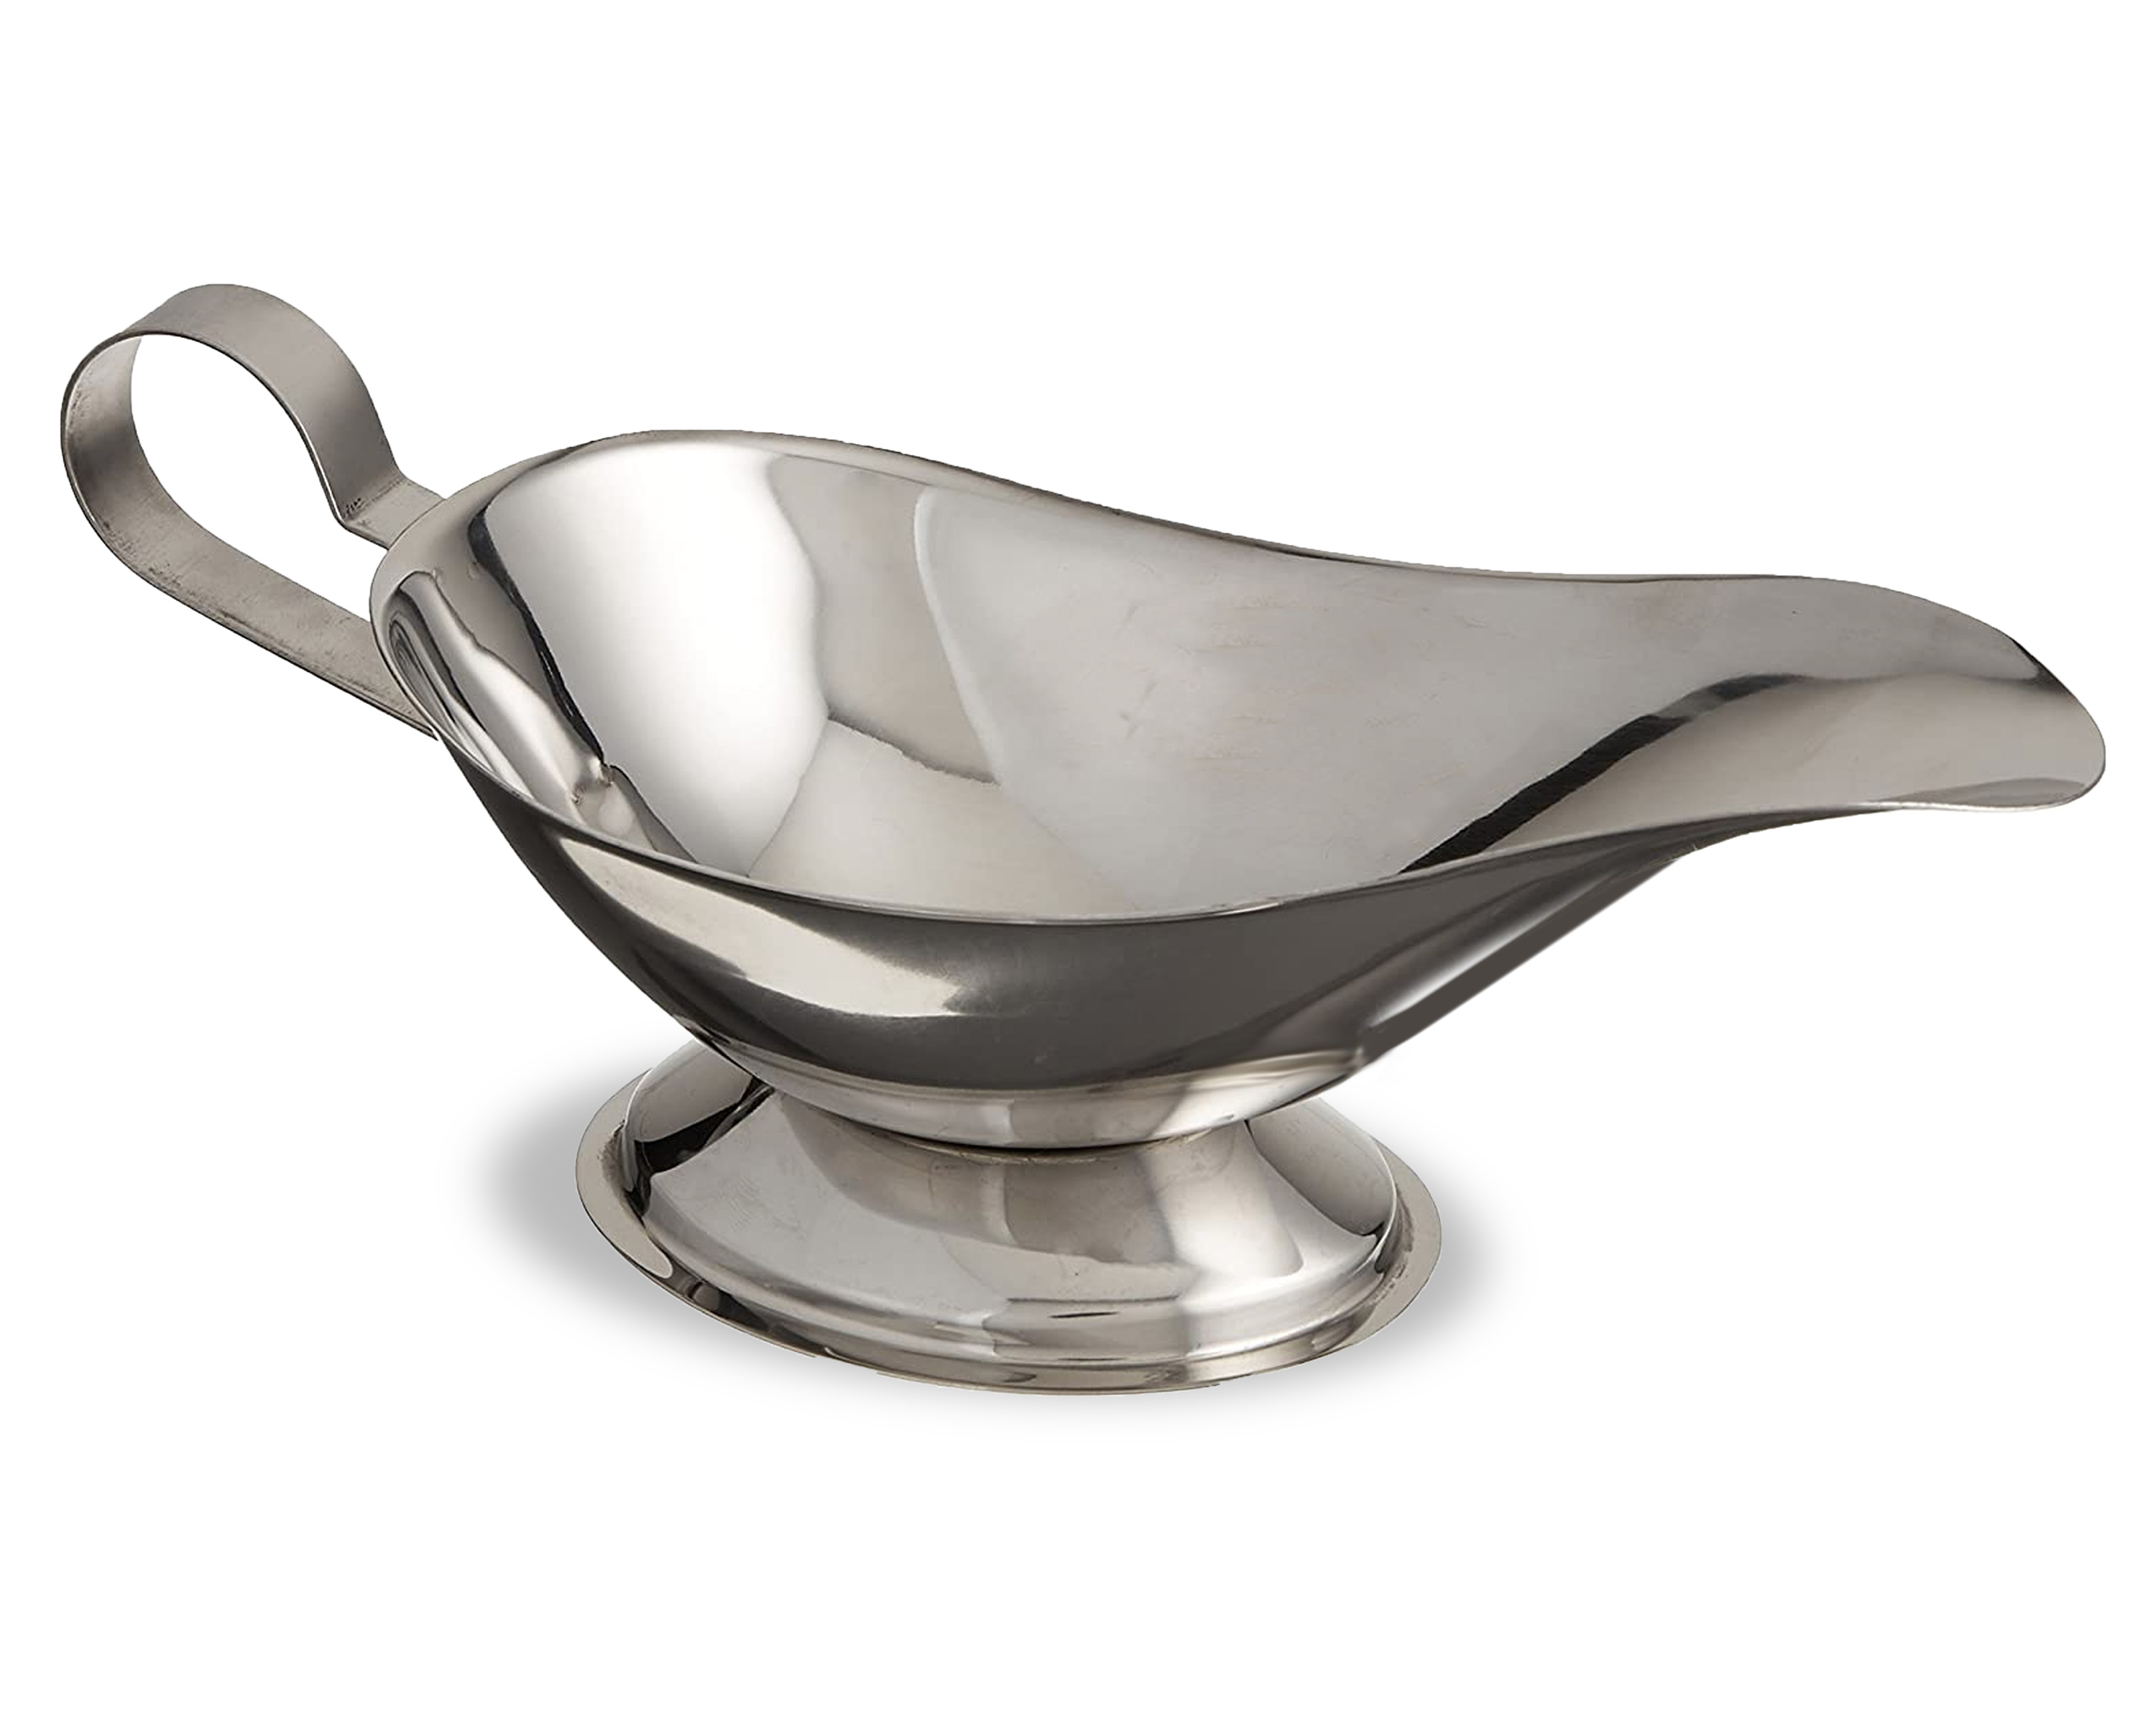 Stainless Gravy Boat, Food Service Rentals